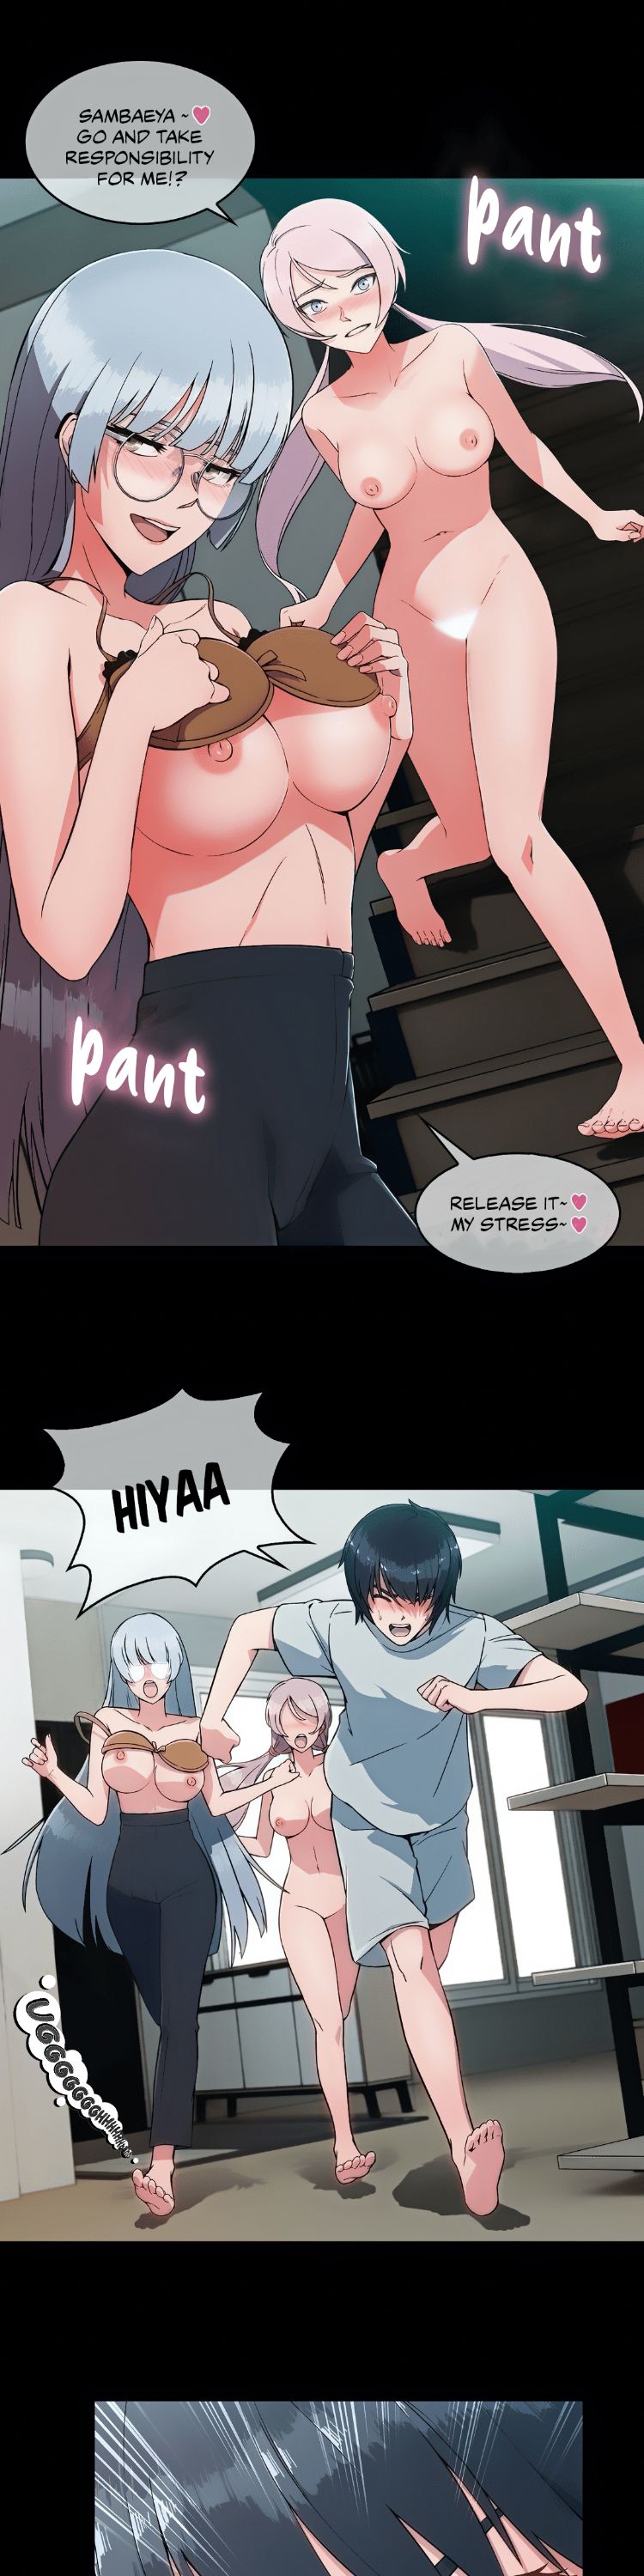 Suspicious Boarding House - Chapter 1 Page 7